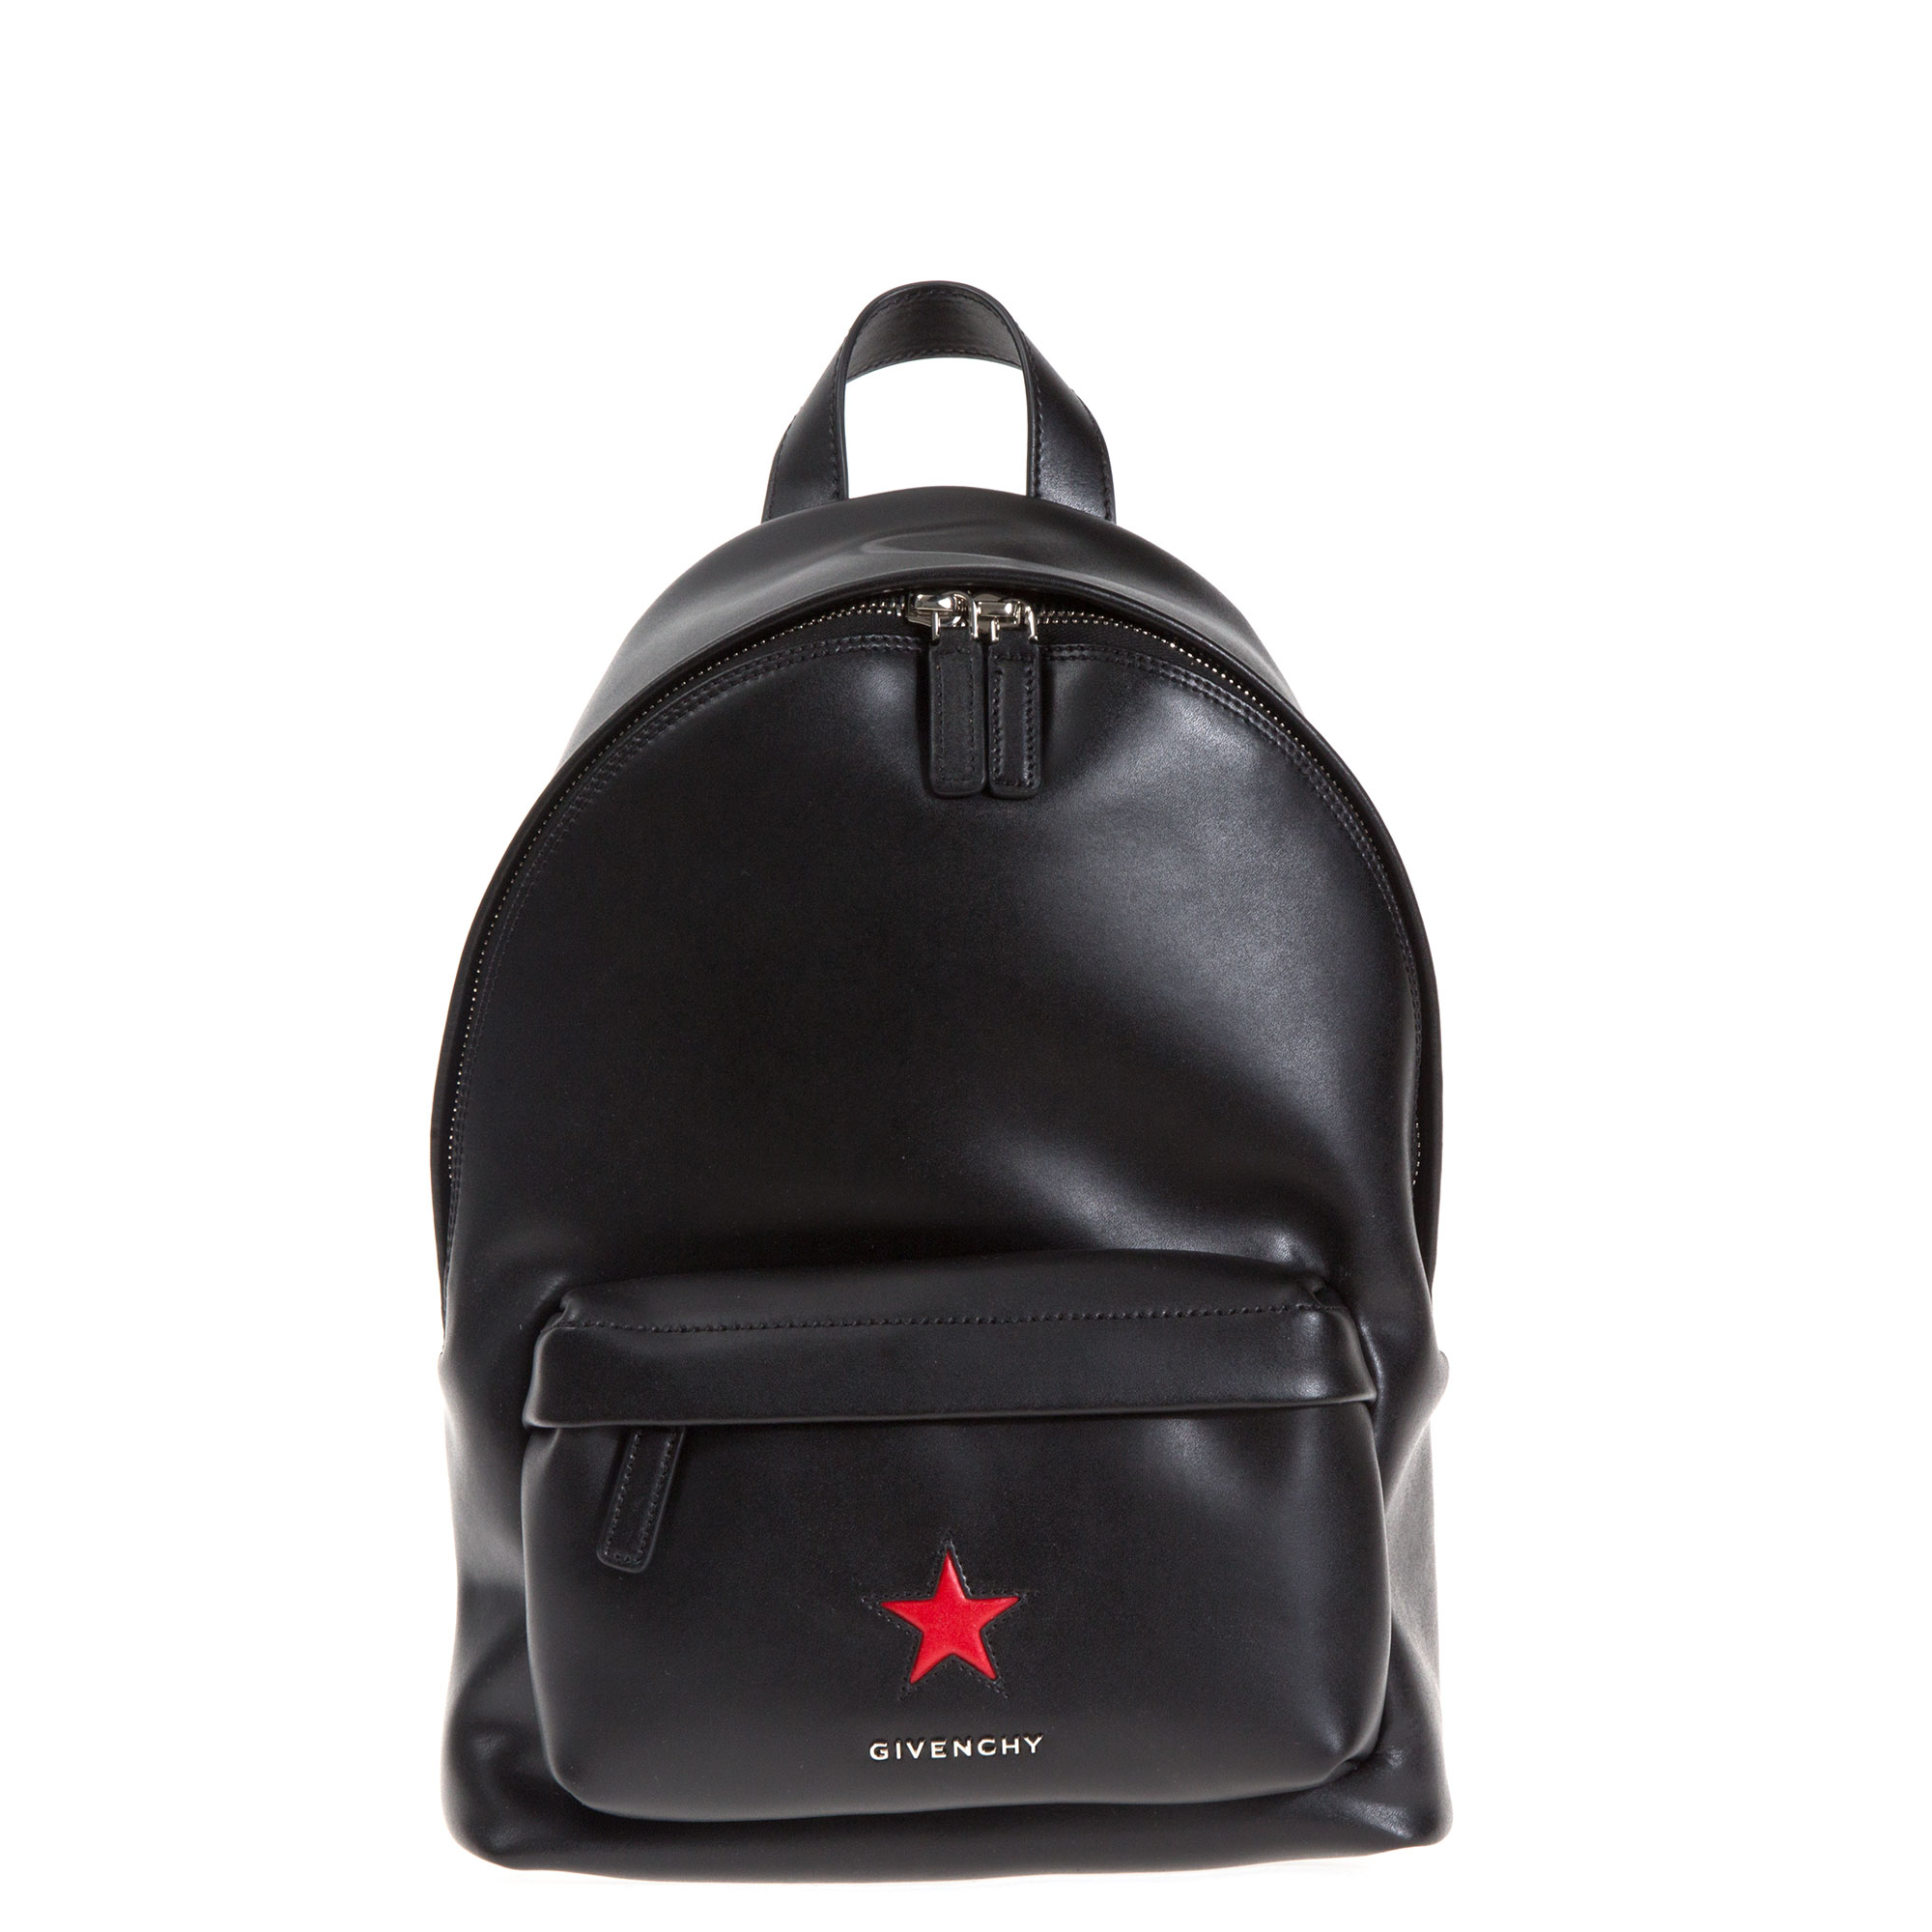 Givenchy Mini Backpack in Black - Lyst